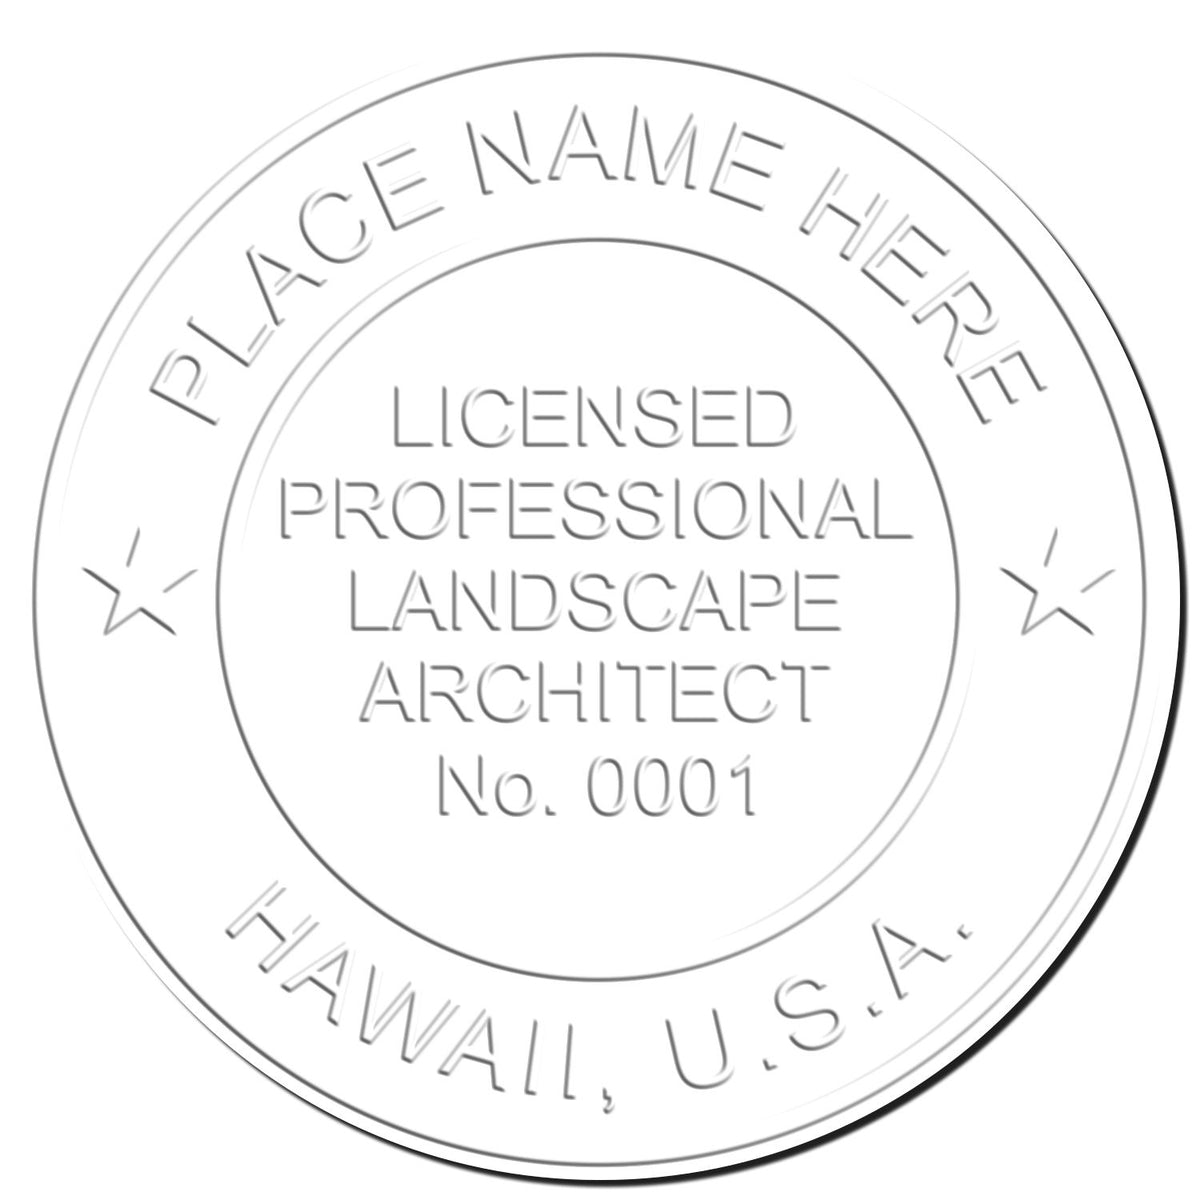 This paper is stamped with a sample imprint of the Hybrid Hawaii Landscape Architect Seal, signifying its quality and reliability.